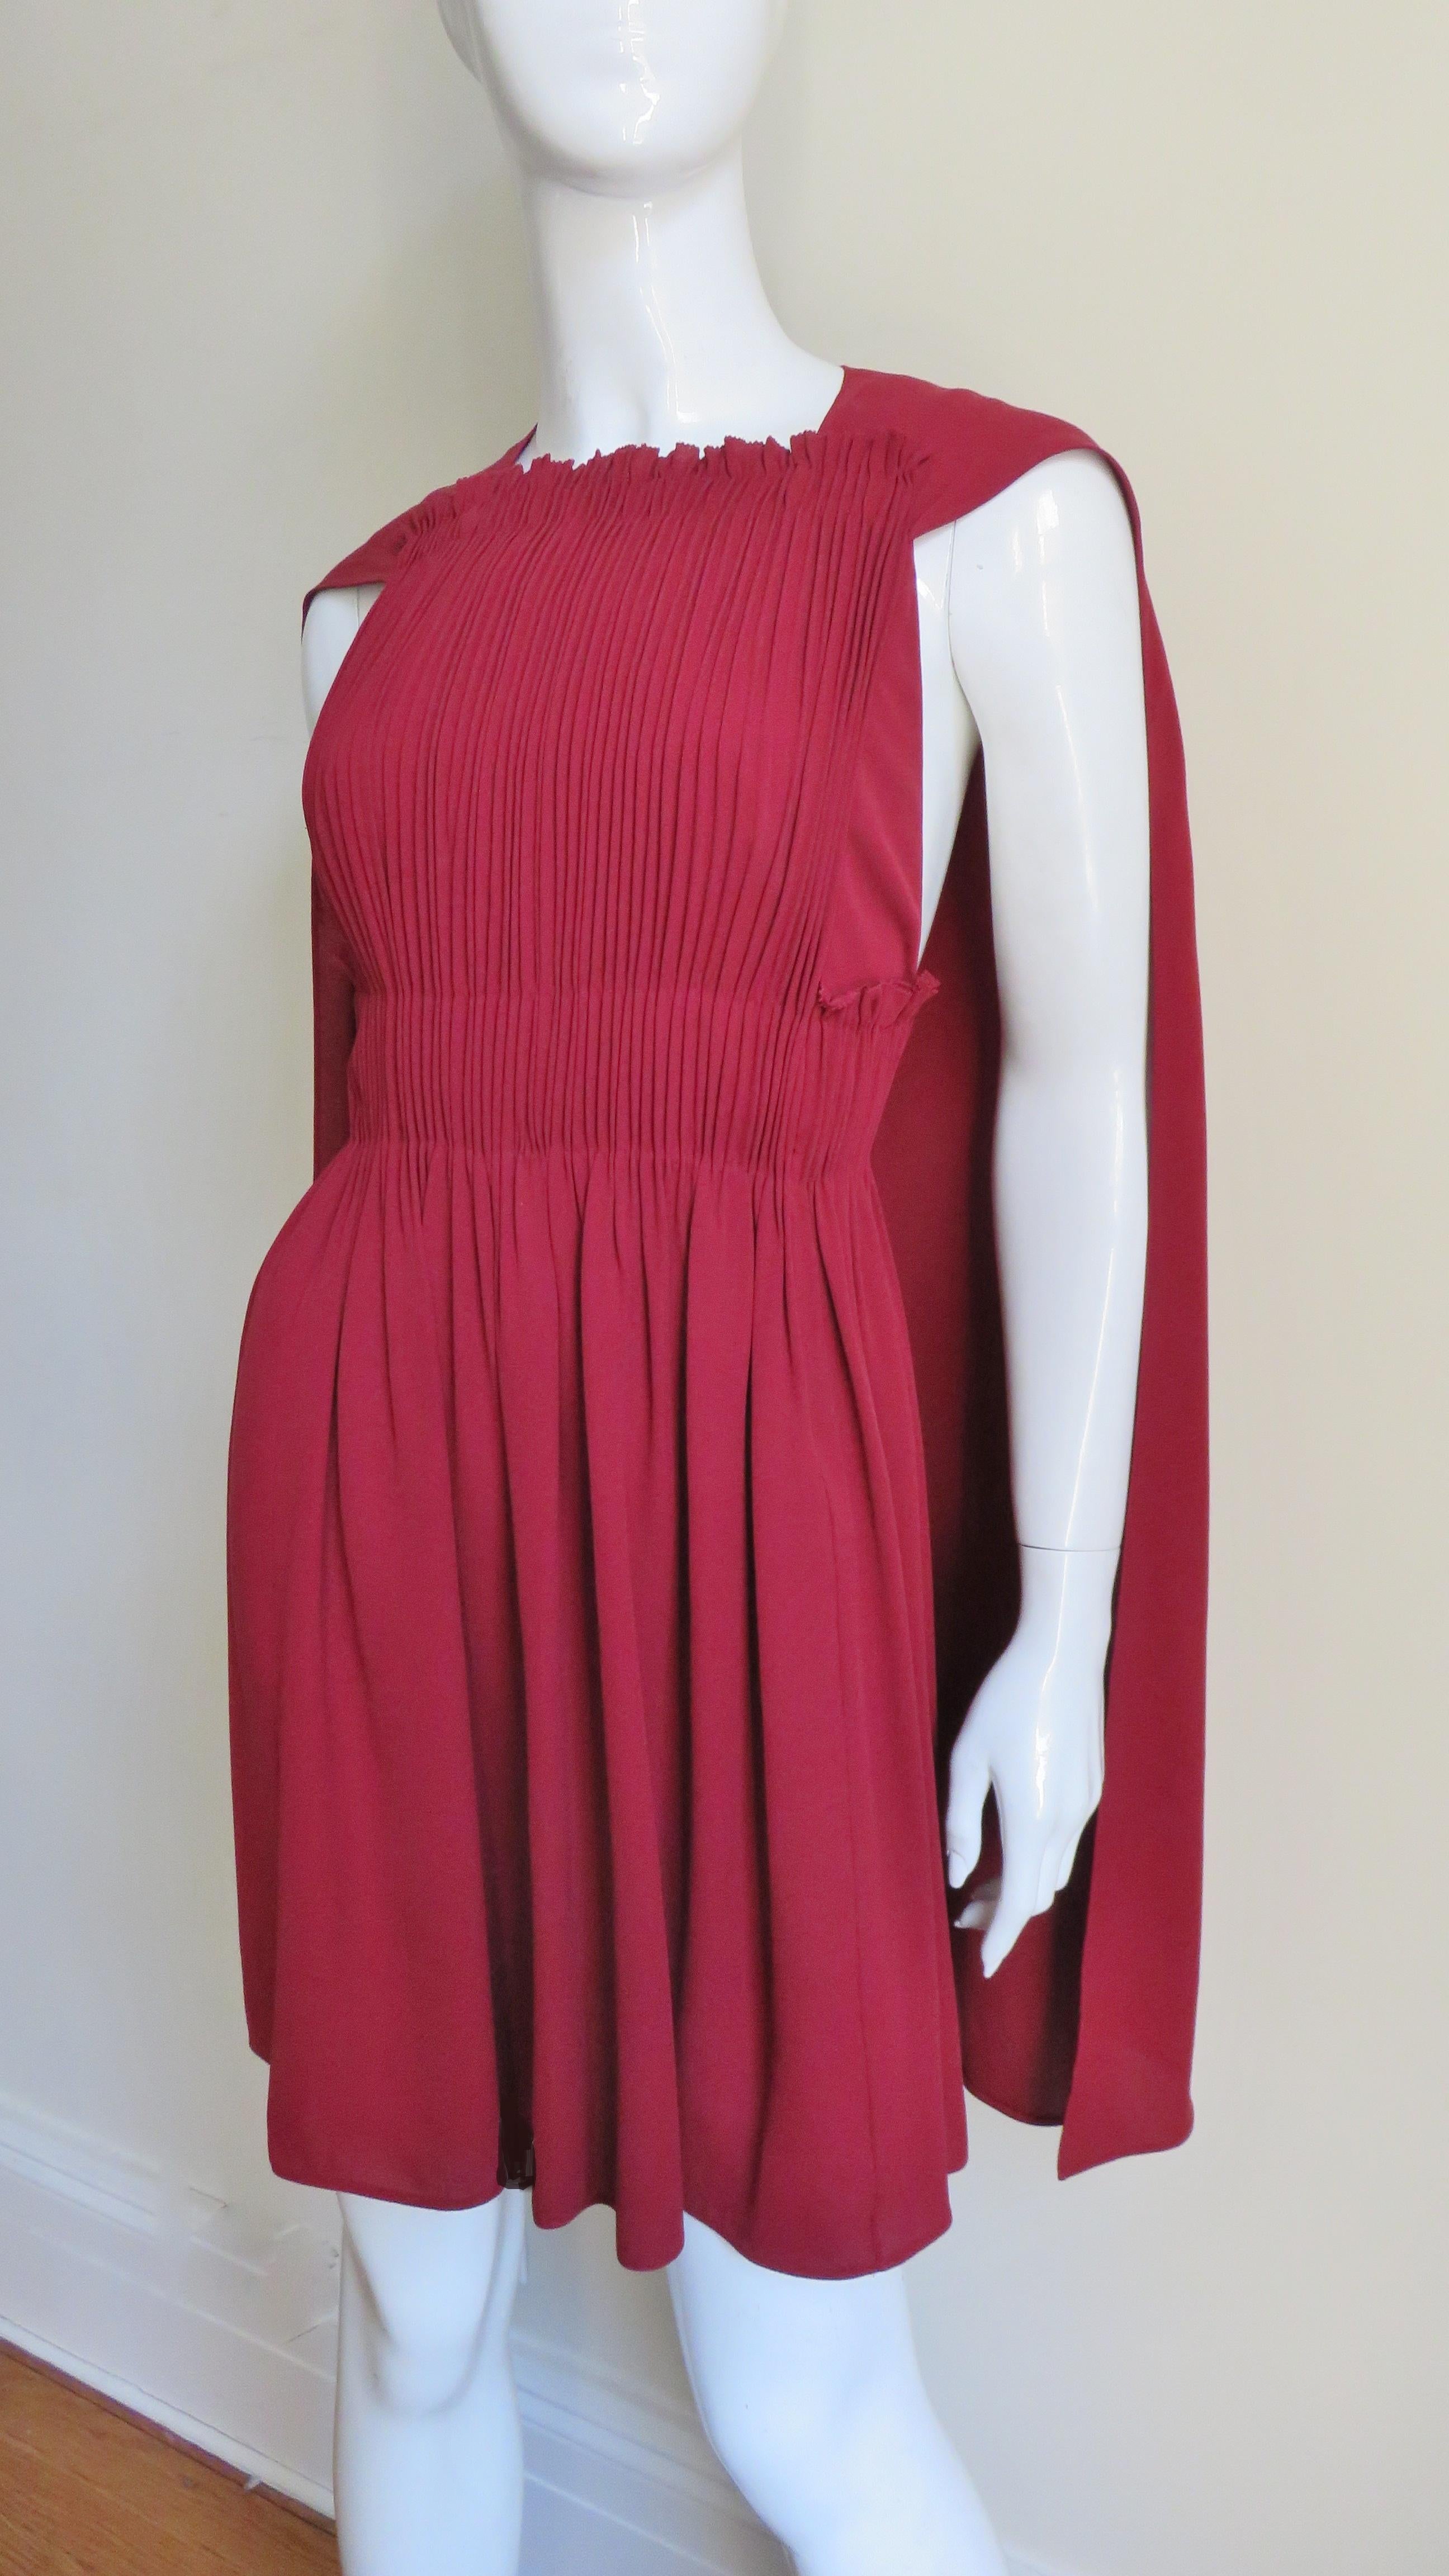 A fabulous deep red silk dress with an attached cape from Valentino. It has an elaborately vertically ruched front bodice with a back cape emanating from the shoulders and a full skirt. It is lined in matching silk, the dress has a back zipper and